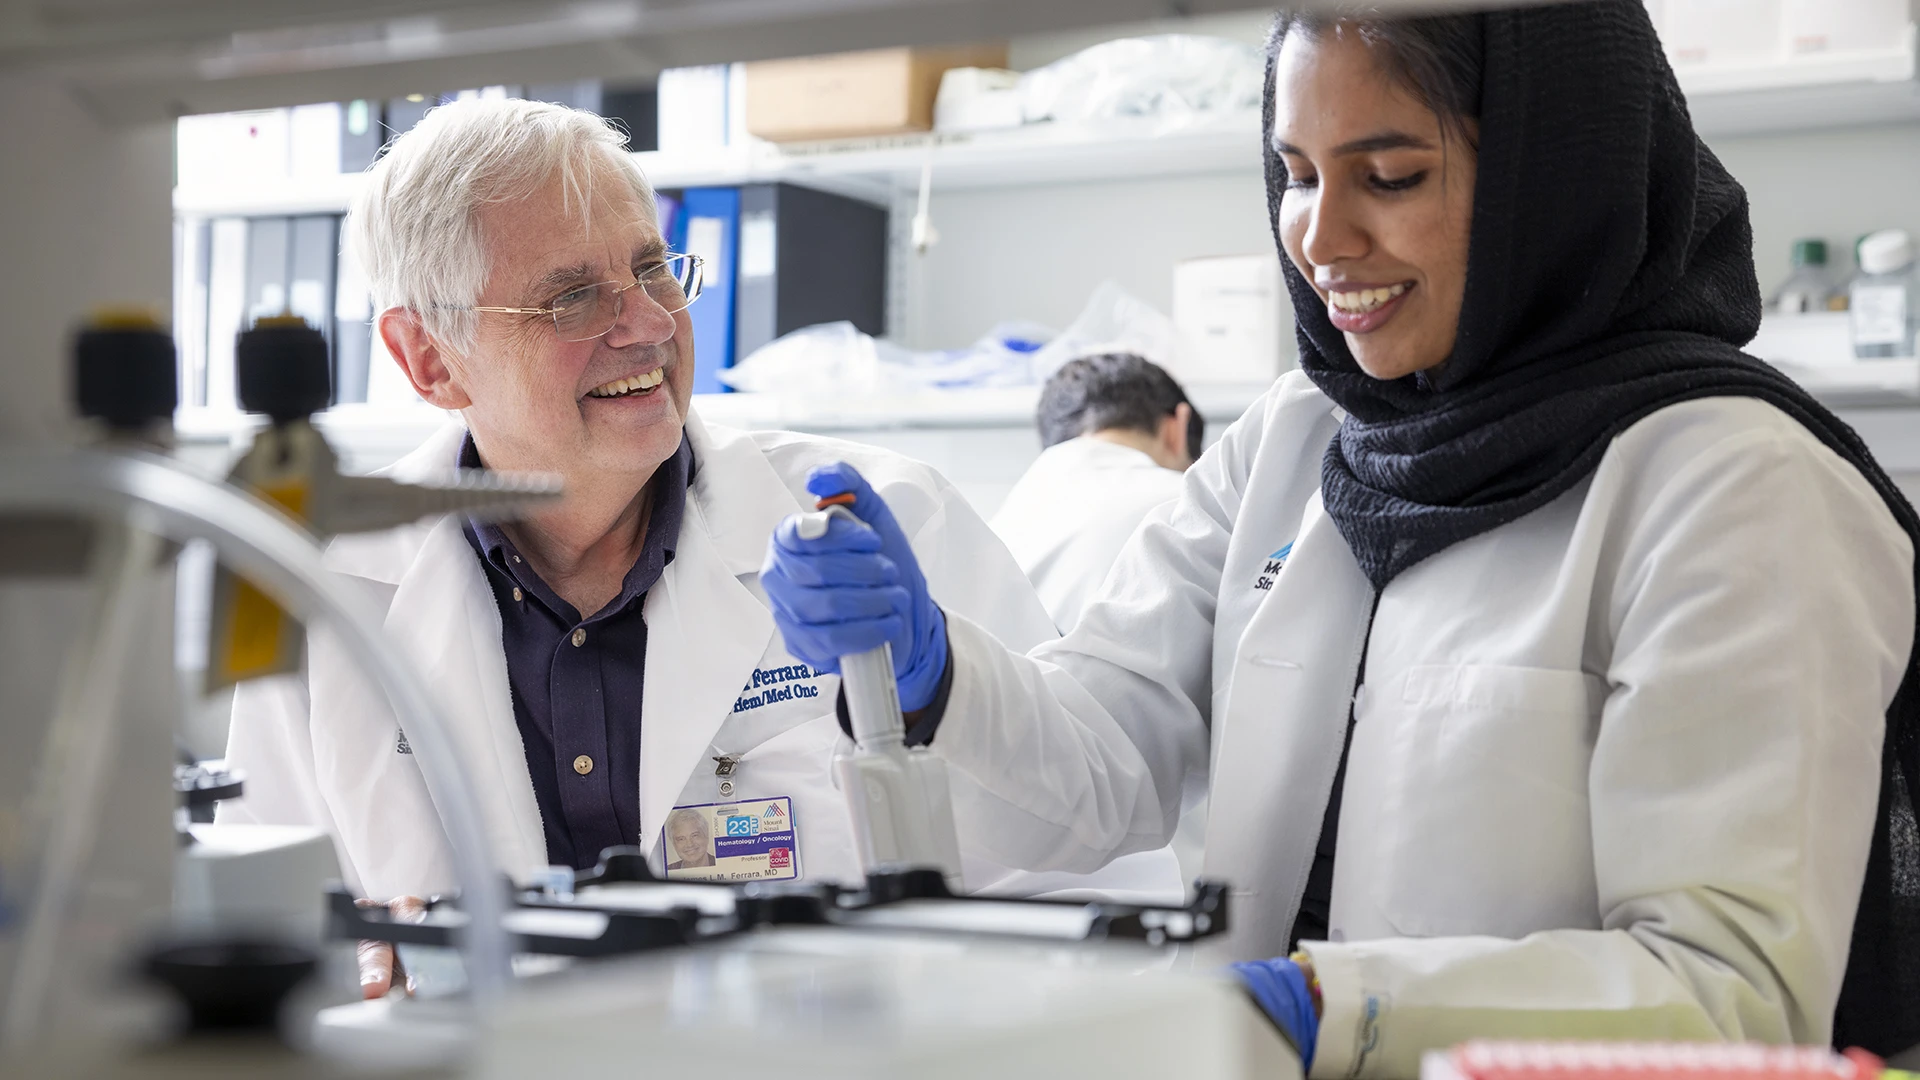 James Ferrara, MD (left), and research associate Rahnuma Beheshti (right) analyzing biomarkers that measure gastrointestinal tissue damage from a blood sample of a patient participating in a Mount Sinai sponsored clinical trial.